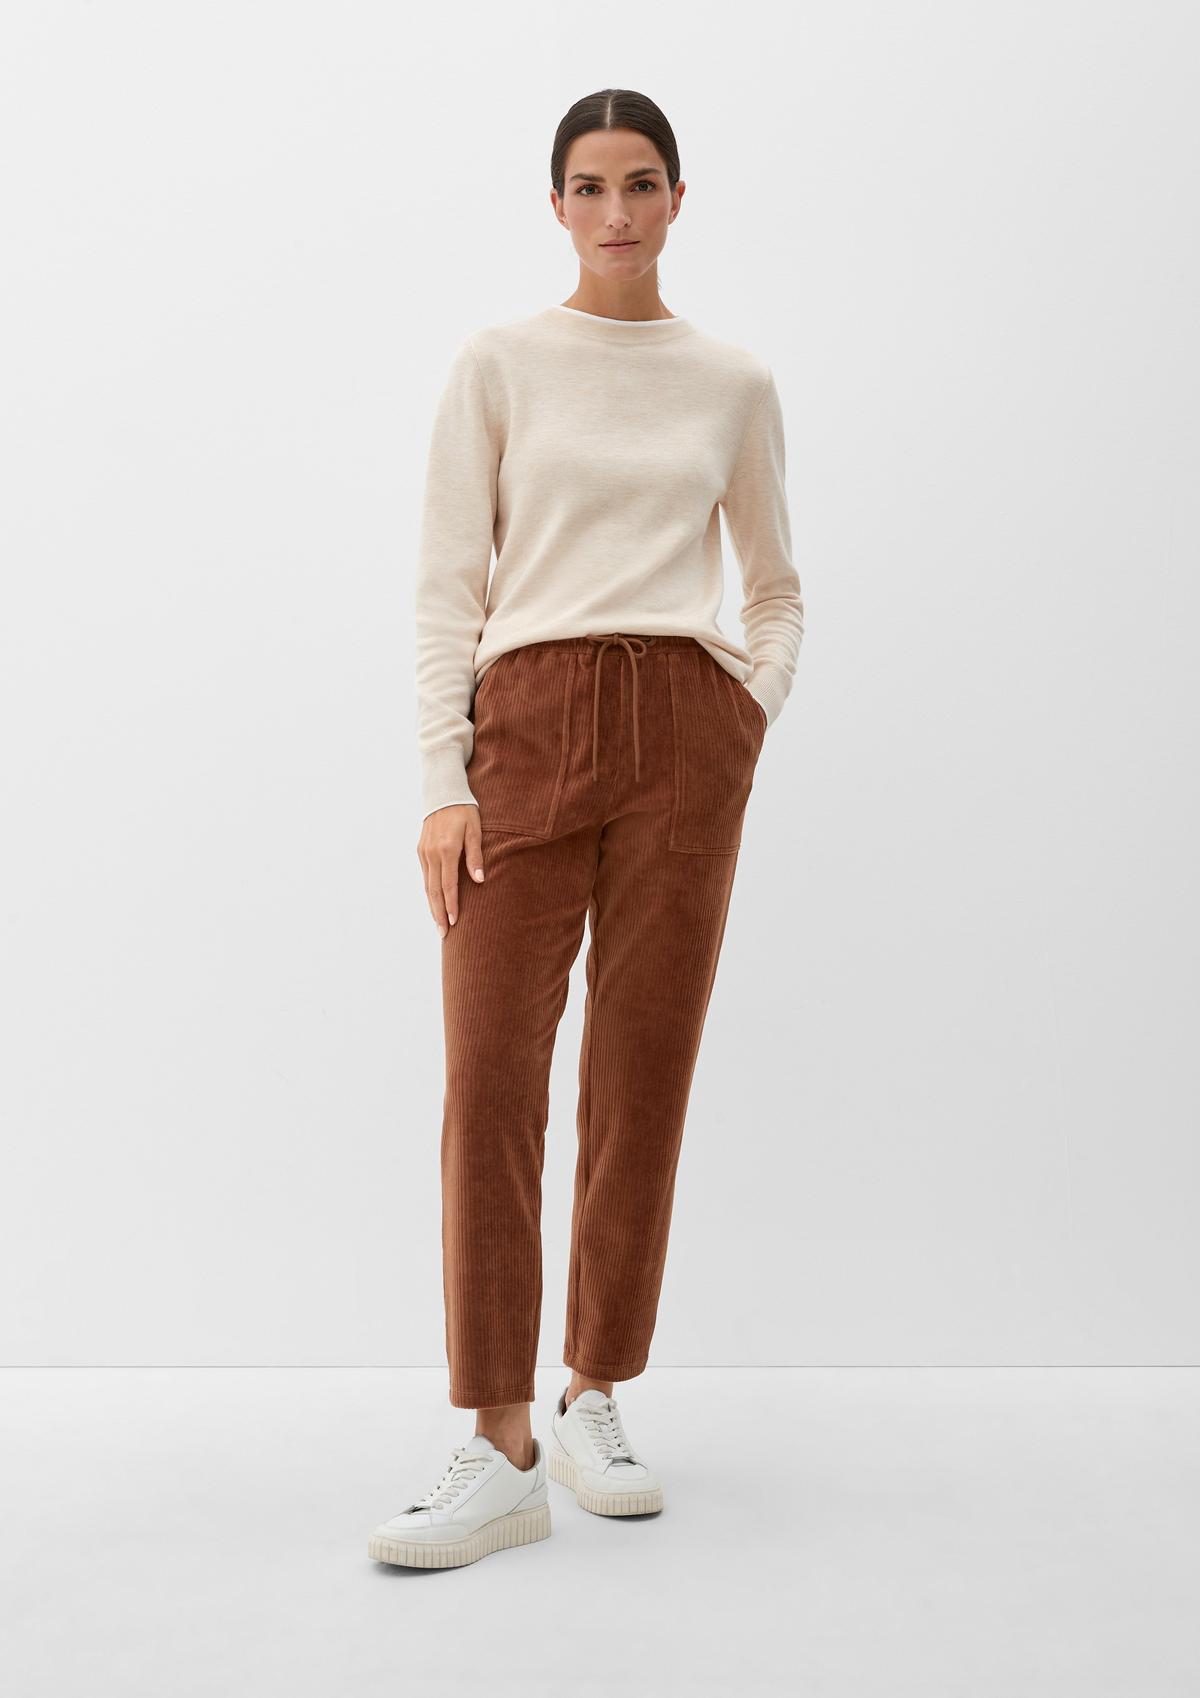 s.Oliver Stretch cotton corduroy trousers